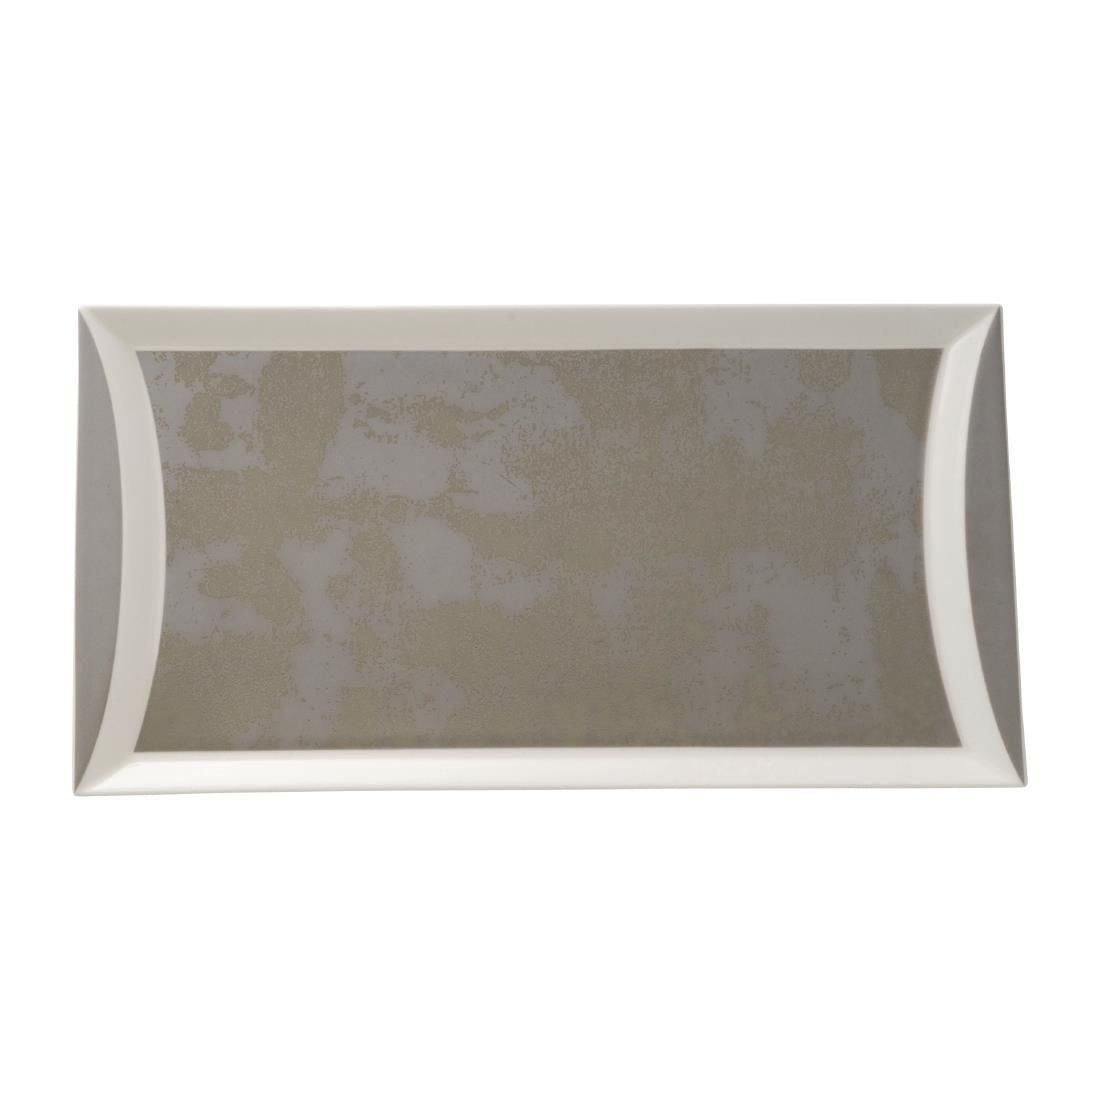 FE125 Royal Crown Derby Crushed Velvet Grey Rectangle Tray 320x160mm (Pack of 6) JD Catering Equipment Solutions Ltd